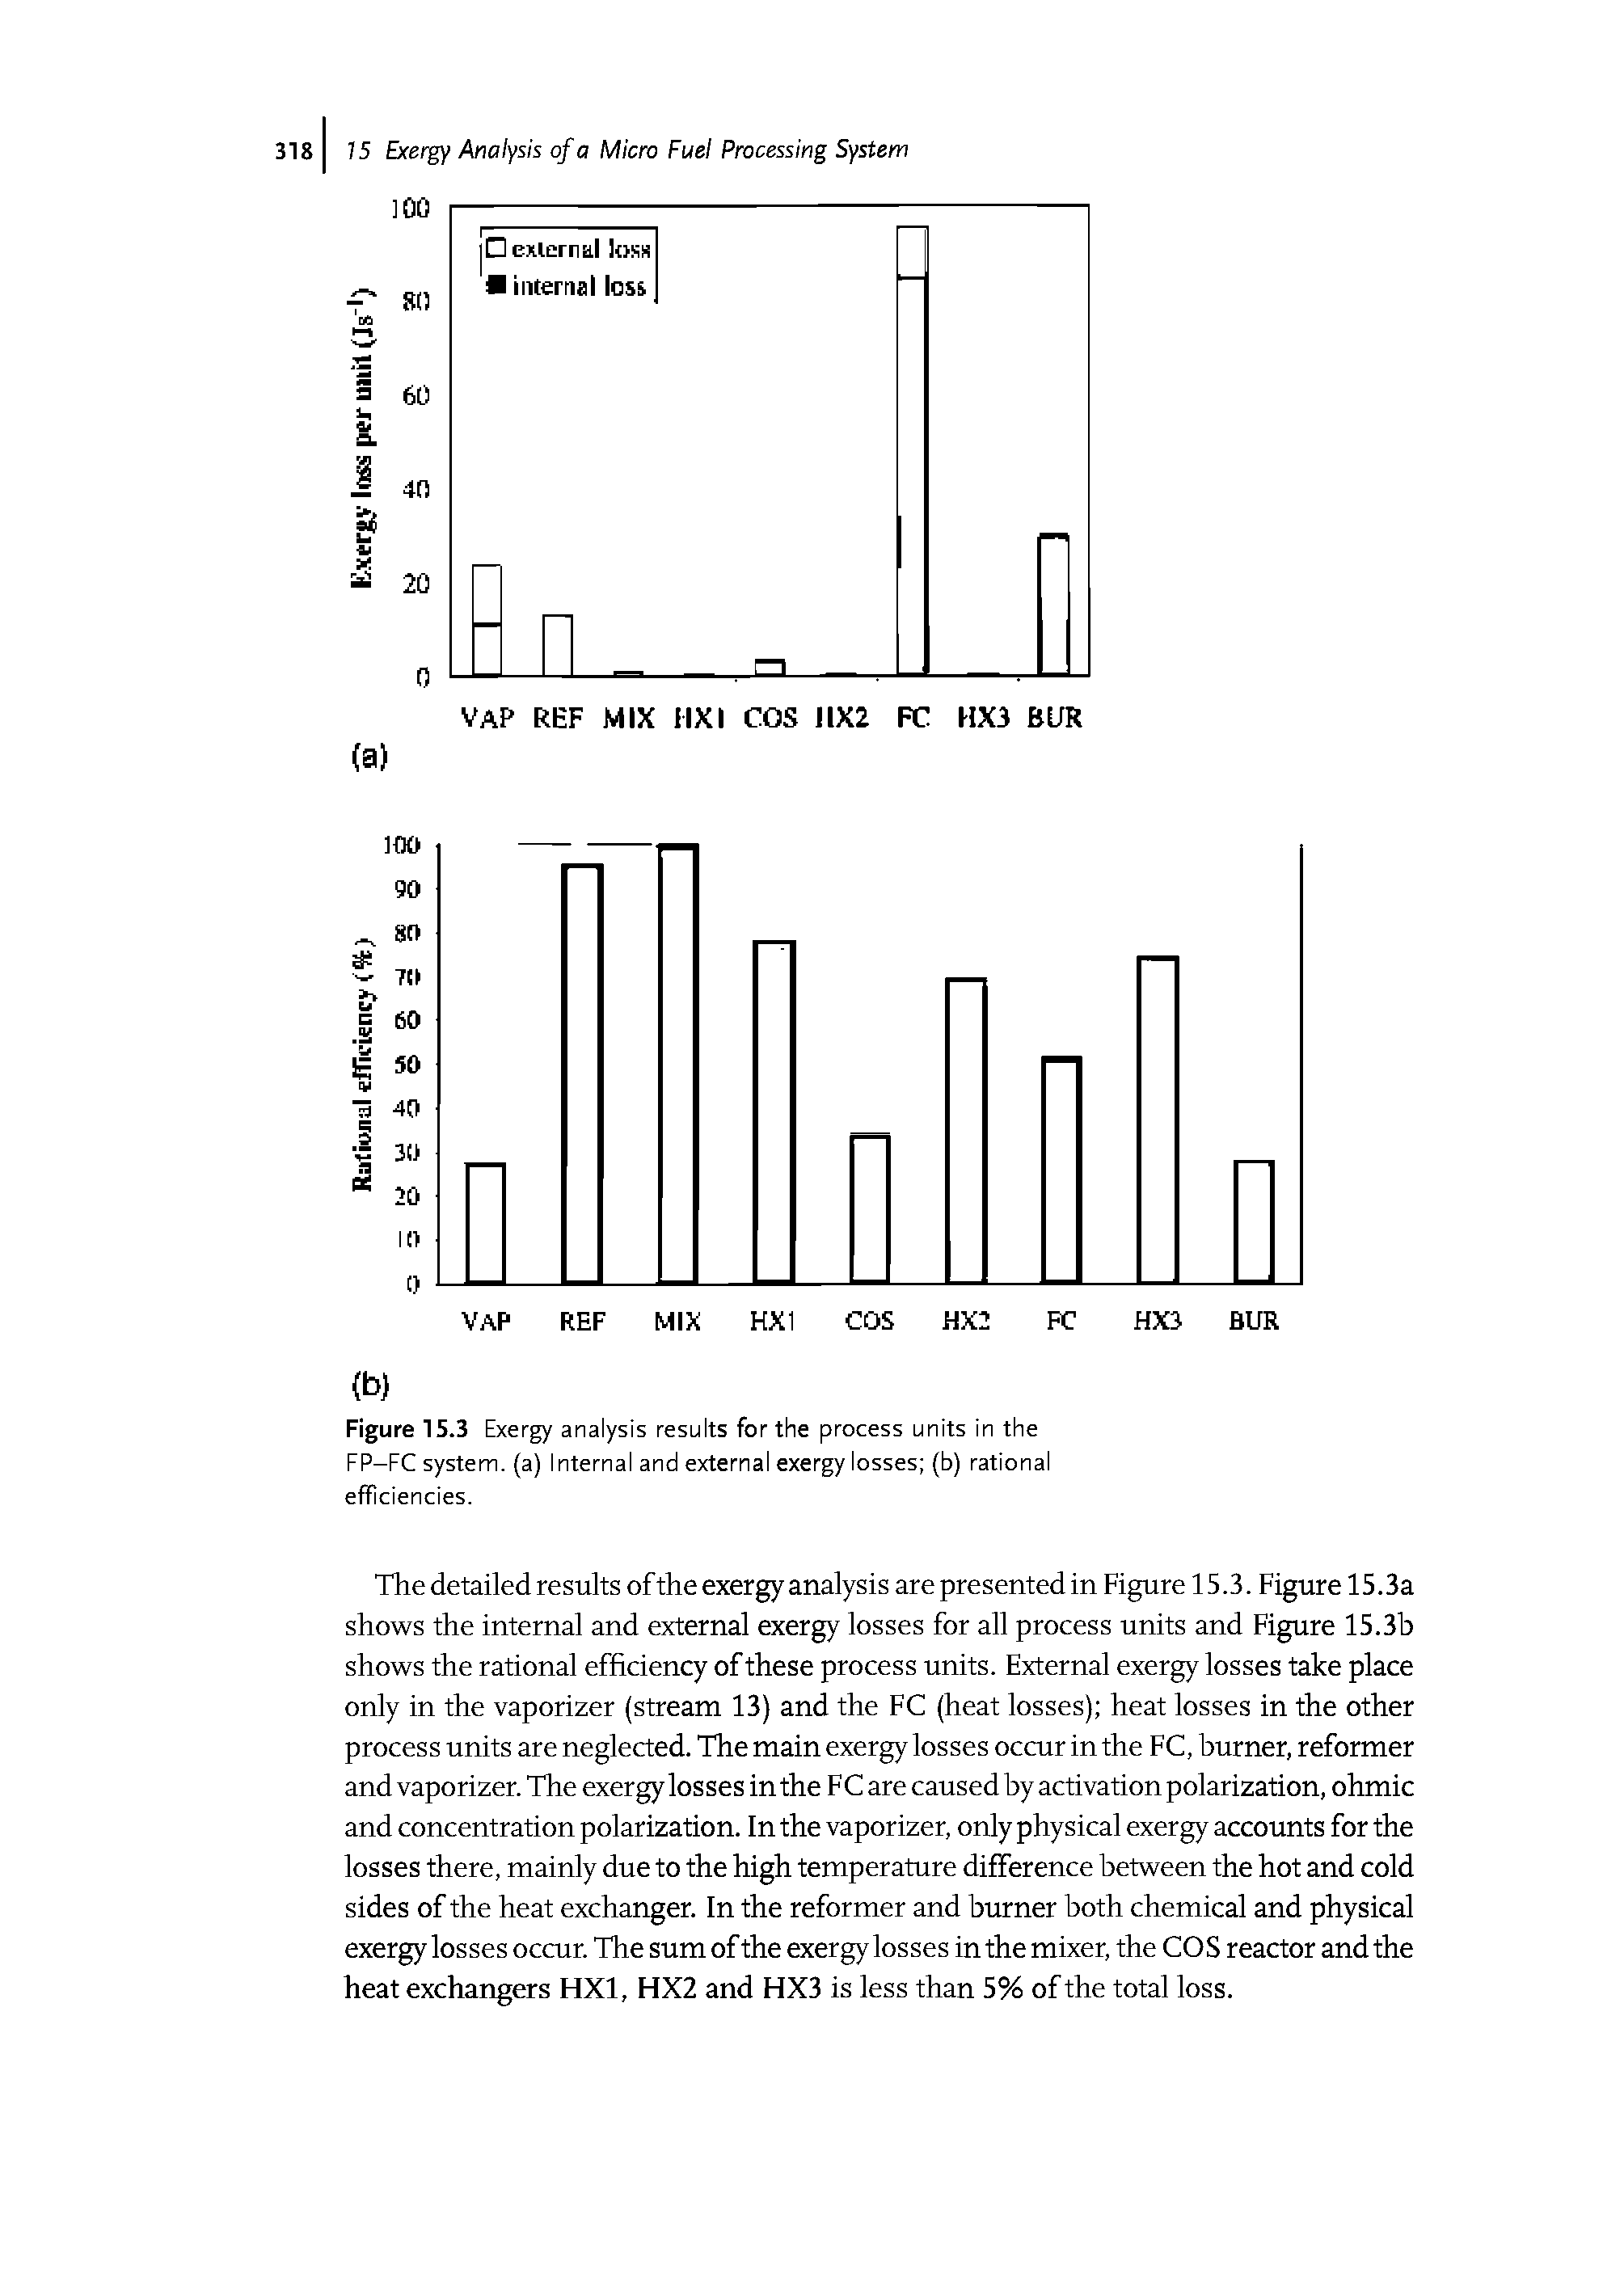 Figure 15.3 Exergy analysis results for the process units in the FP-FC system, (a) Internal and external exergy losses (b) rational efficiencies.